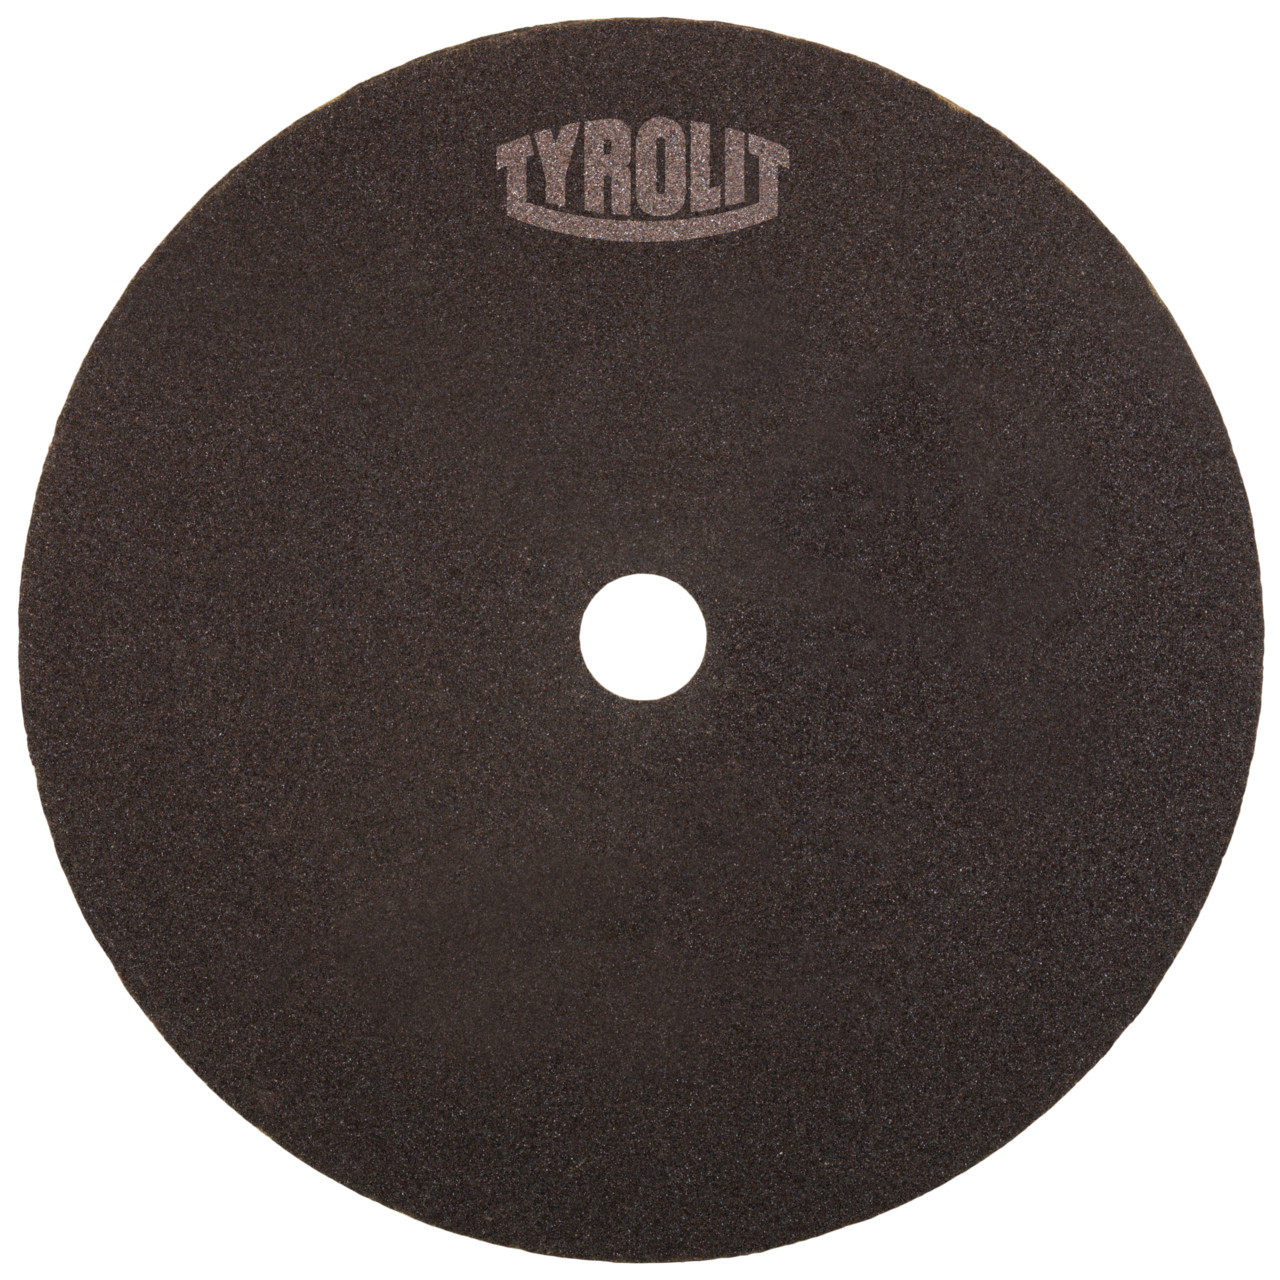 TYROLIT cut-off wheel for cutting and saw sharpening DxDxH 125x1x20 For steel and HSS, shape: 41N - straight version (non-woven cut-off wheel), Art. 282079